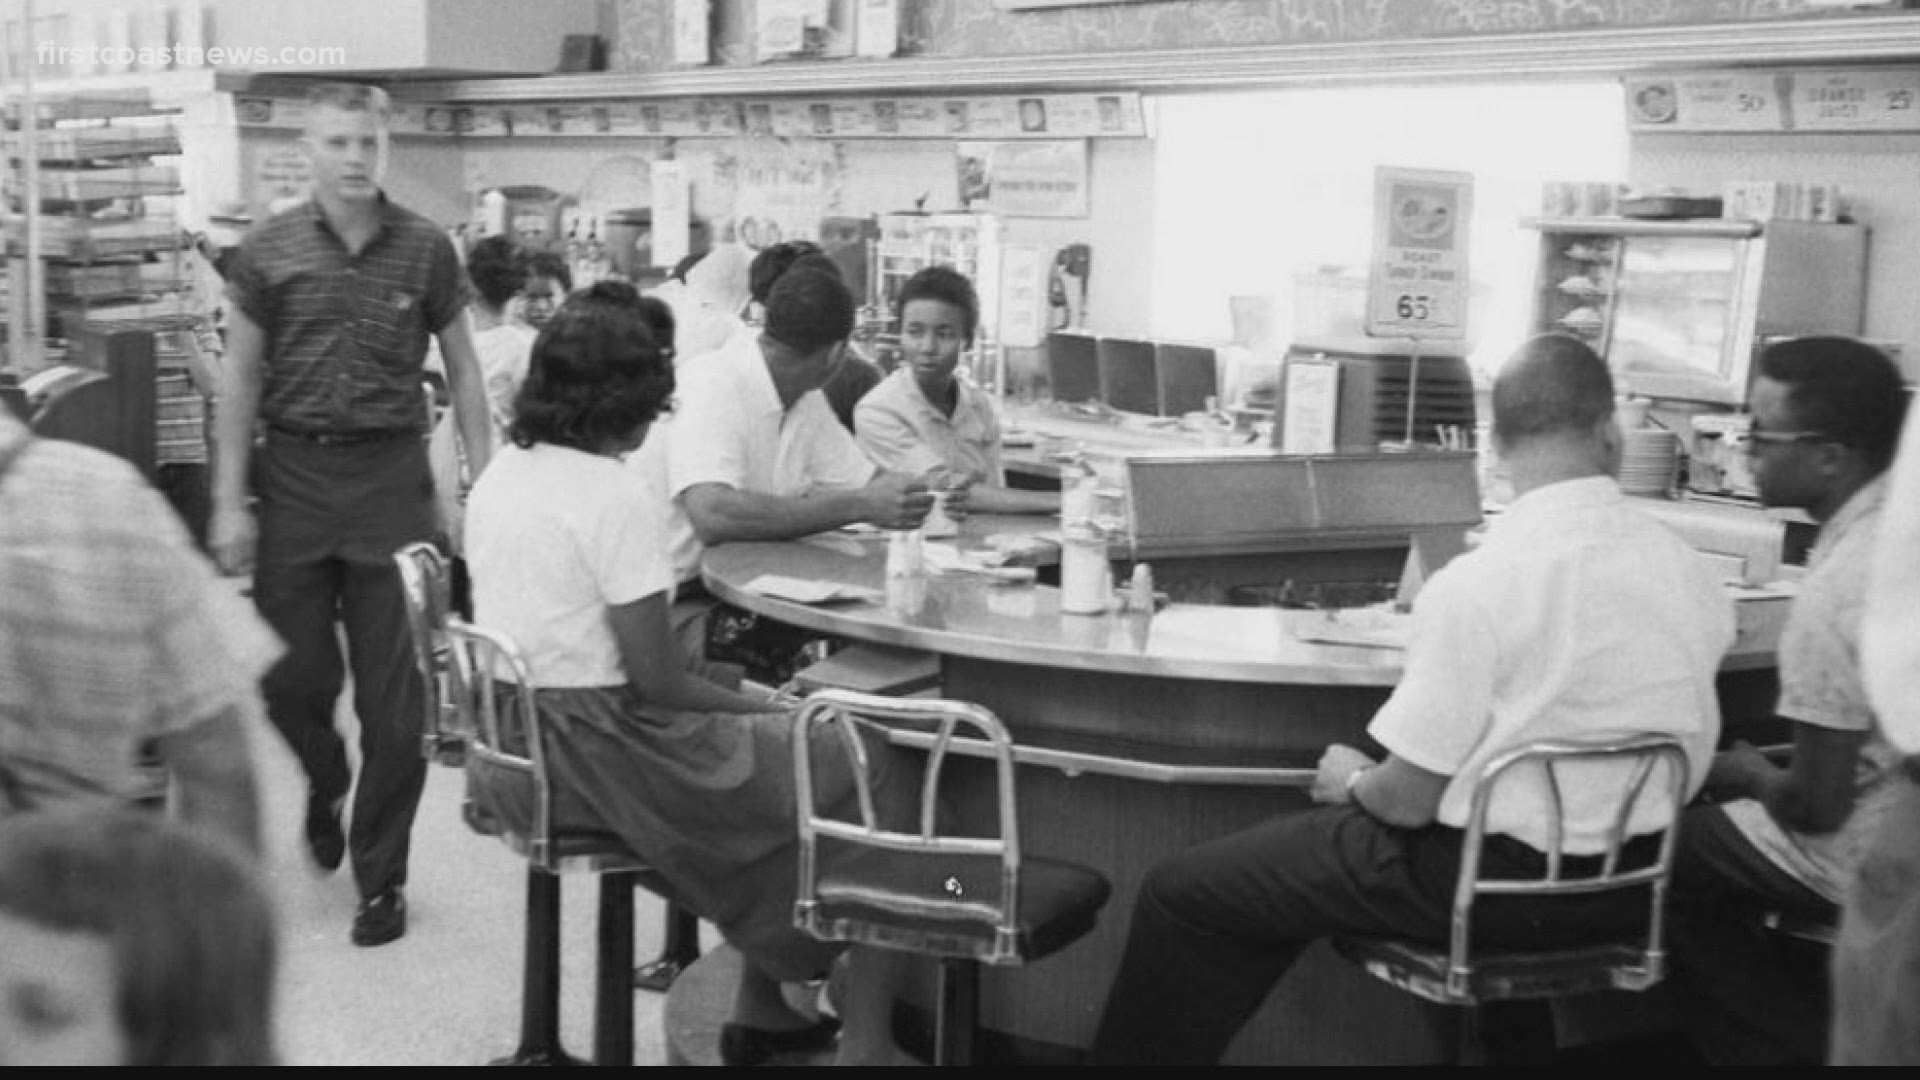 Rodney Hurst was 16 during Jacksonville's most notorious race riot. Following weeks of peaceful demonstrations protesting racial segregation came a violent backlash.